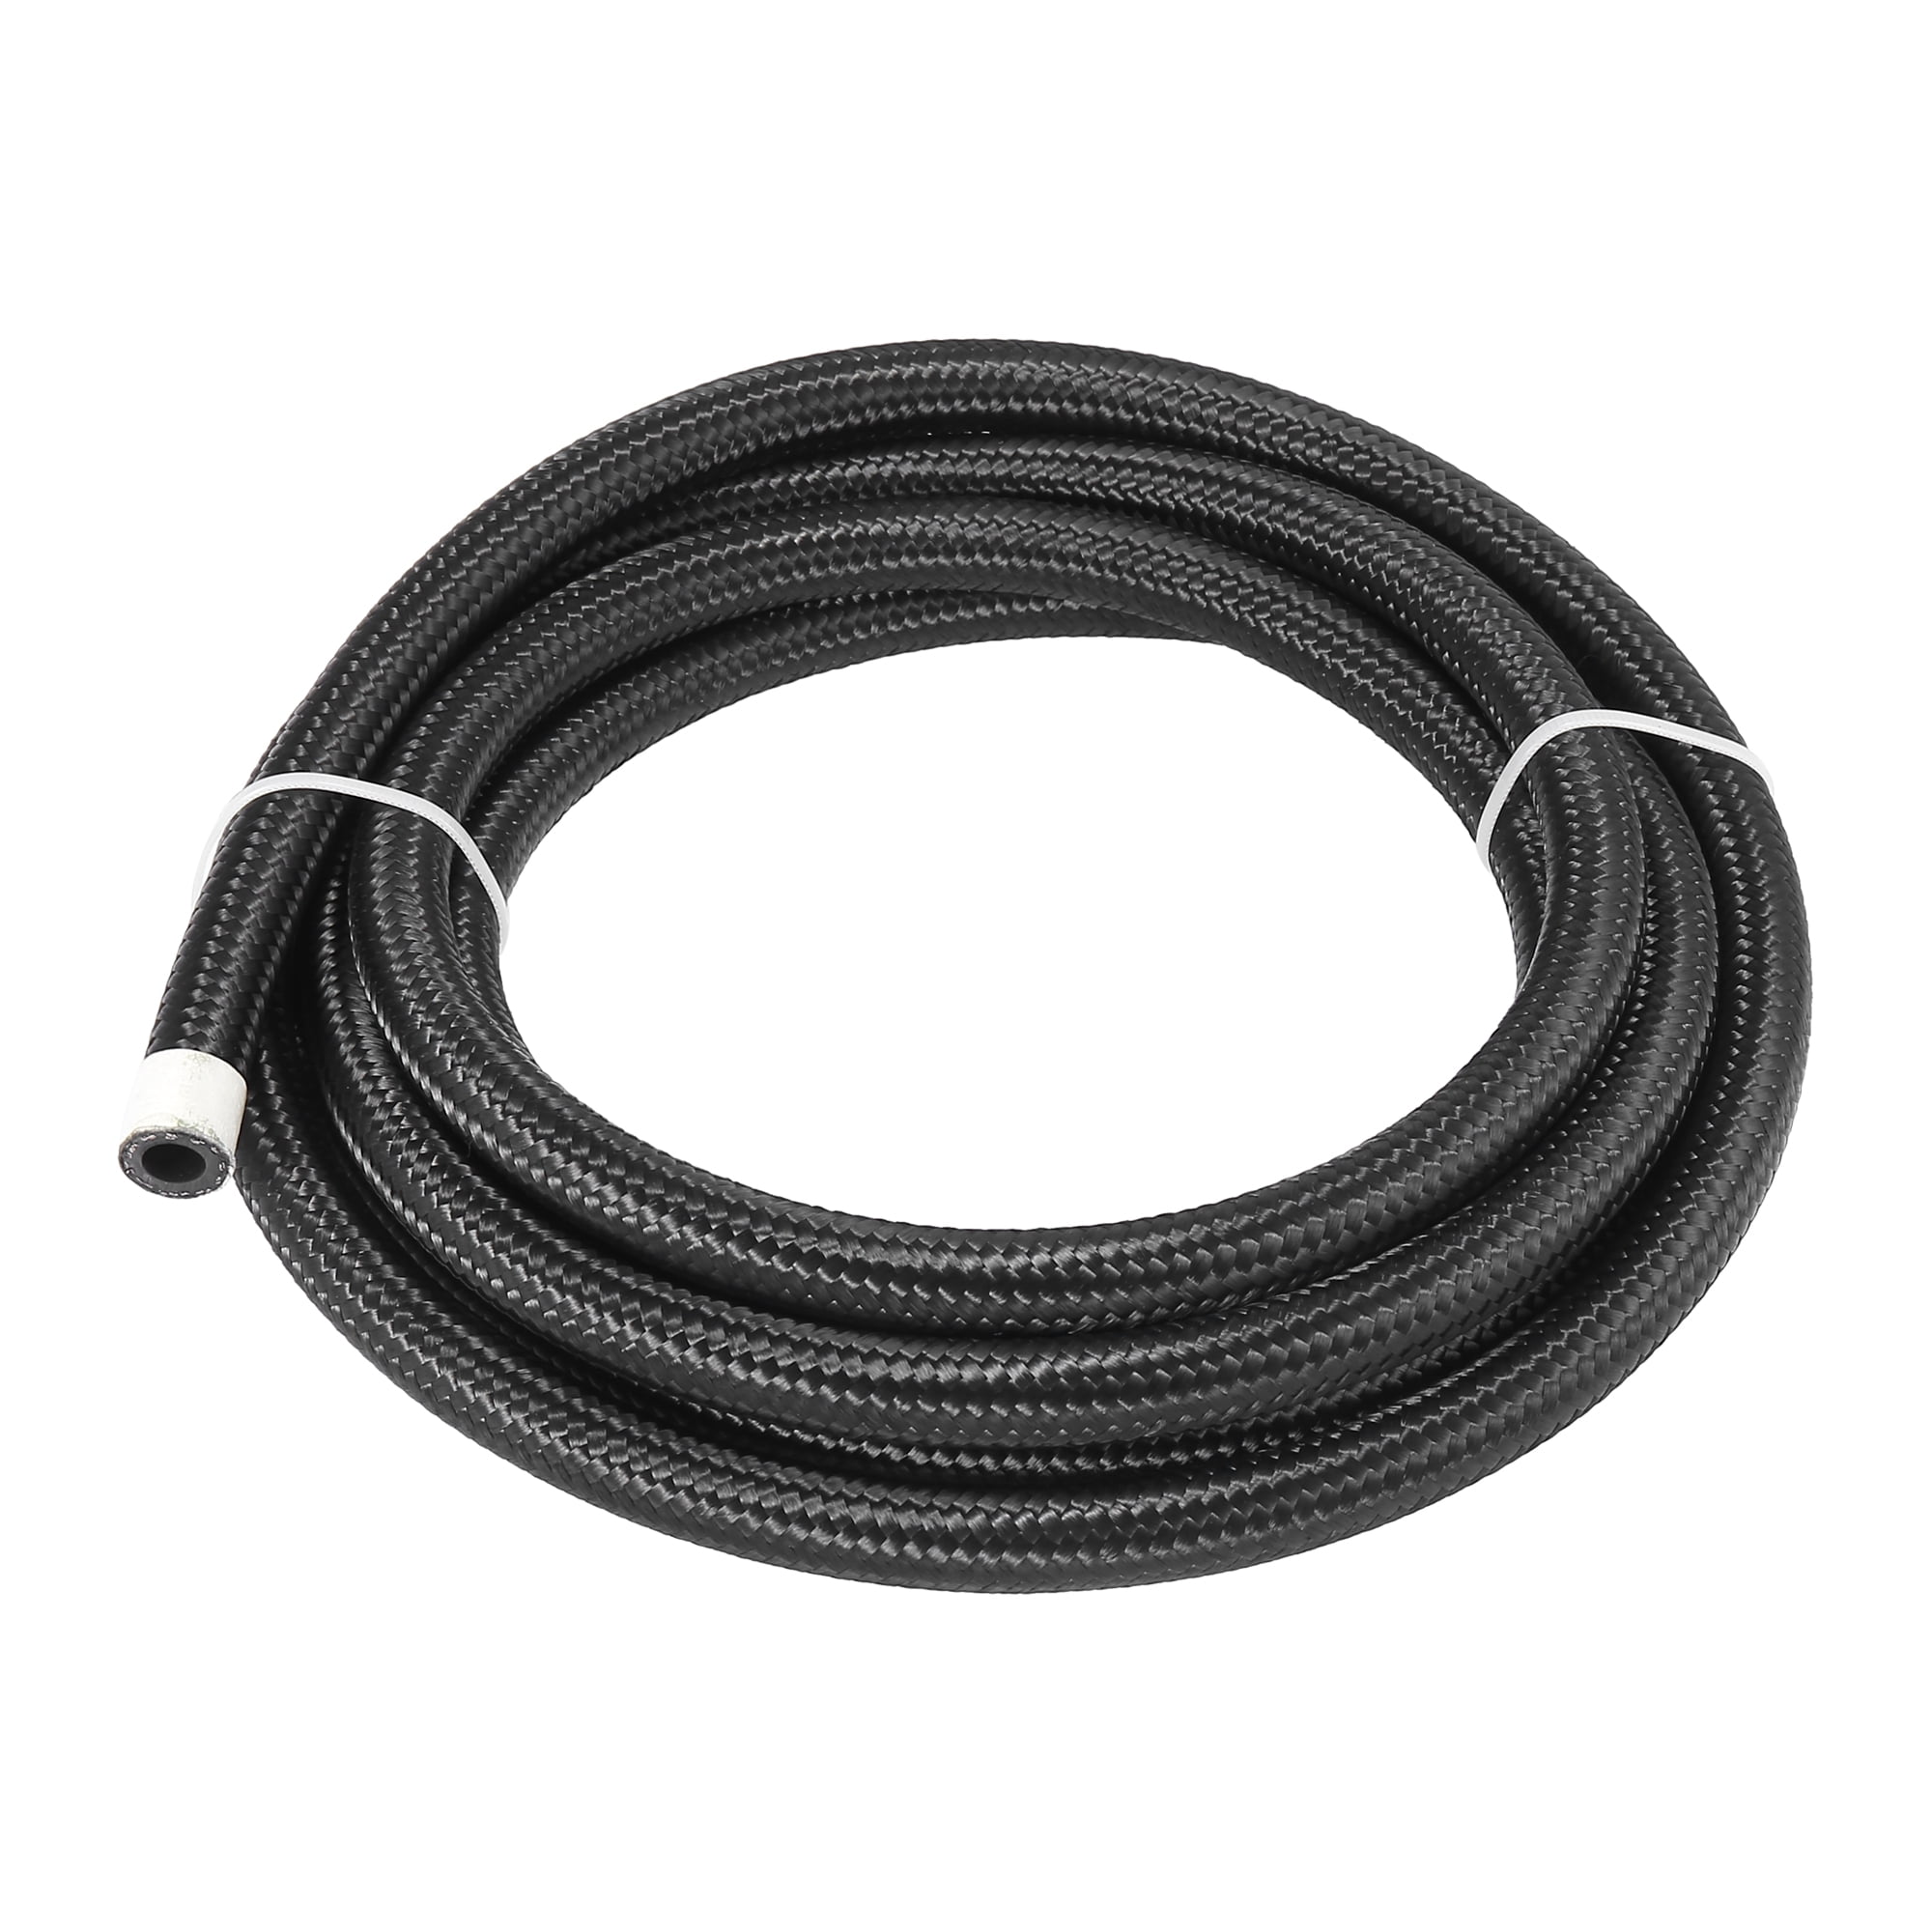 RENO 6AN Fuel Line Kit, 6AN Fuel Hose Nylon Braided Fuel Line Hose Fitting  Kit (CPE 10FT, Black, 0.34 Inch ID)